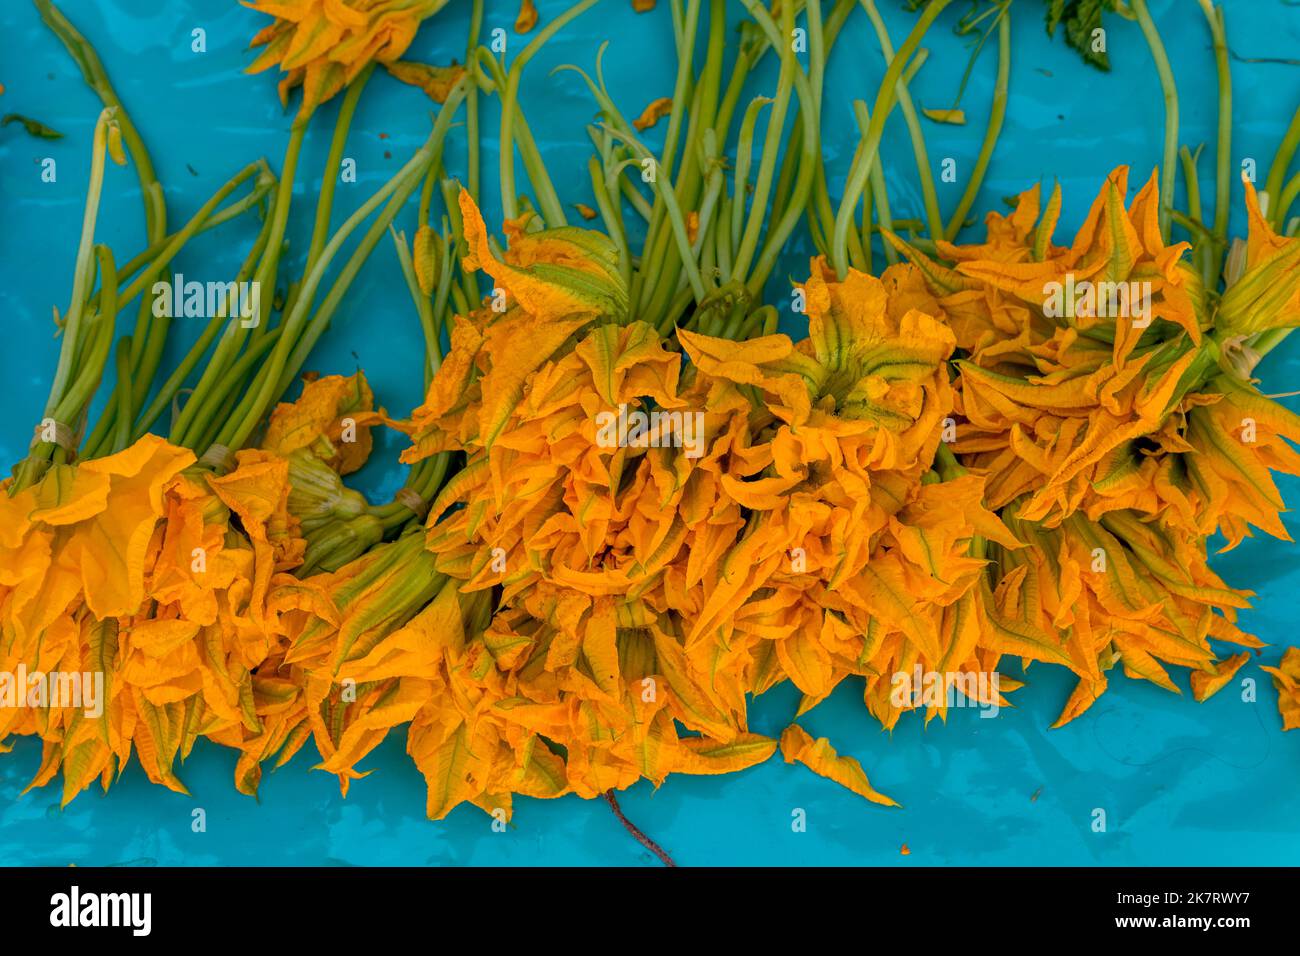 Squash flowers for sale on the daily market in Teotitlan del Valle, a small town in the Valles Centrales Region near Oaxaca, southern Mexico. Stock Photo